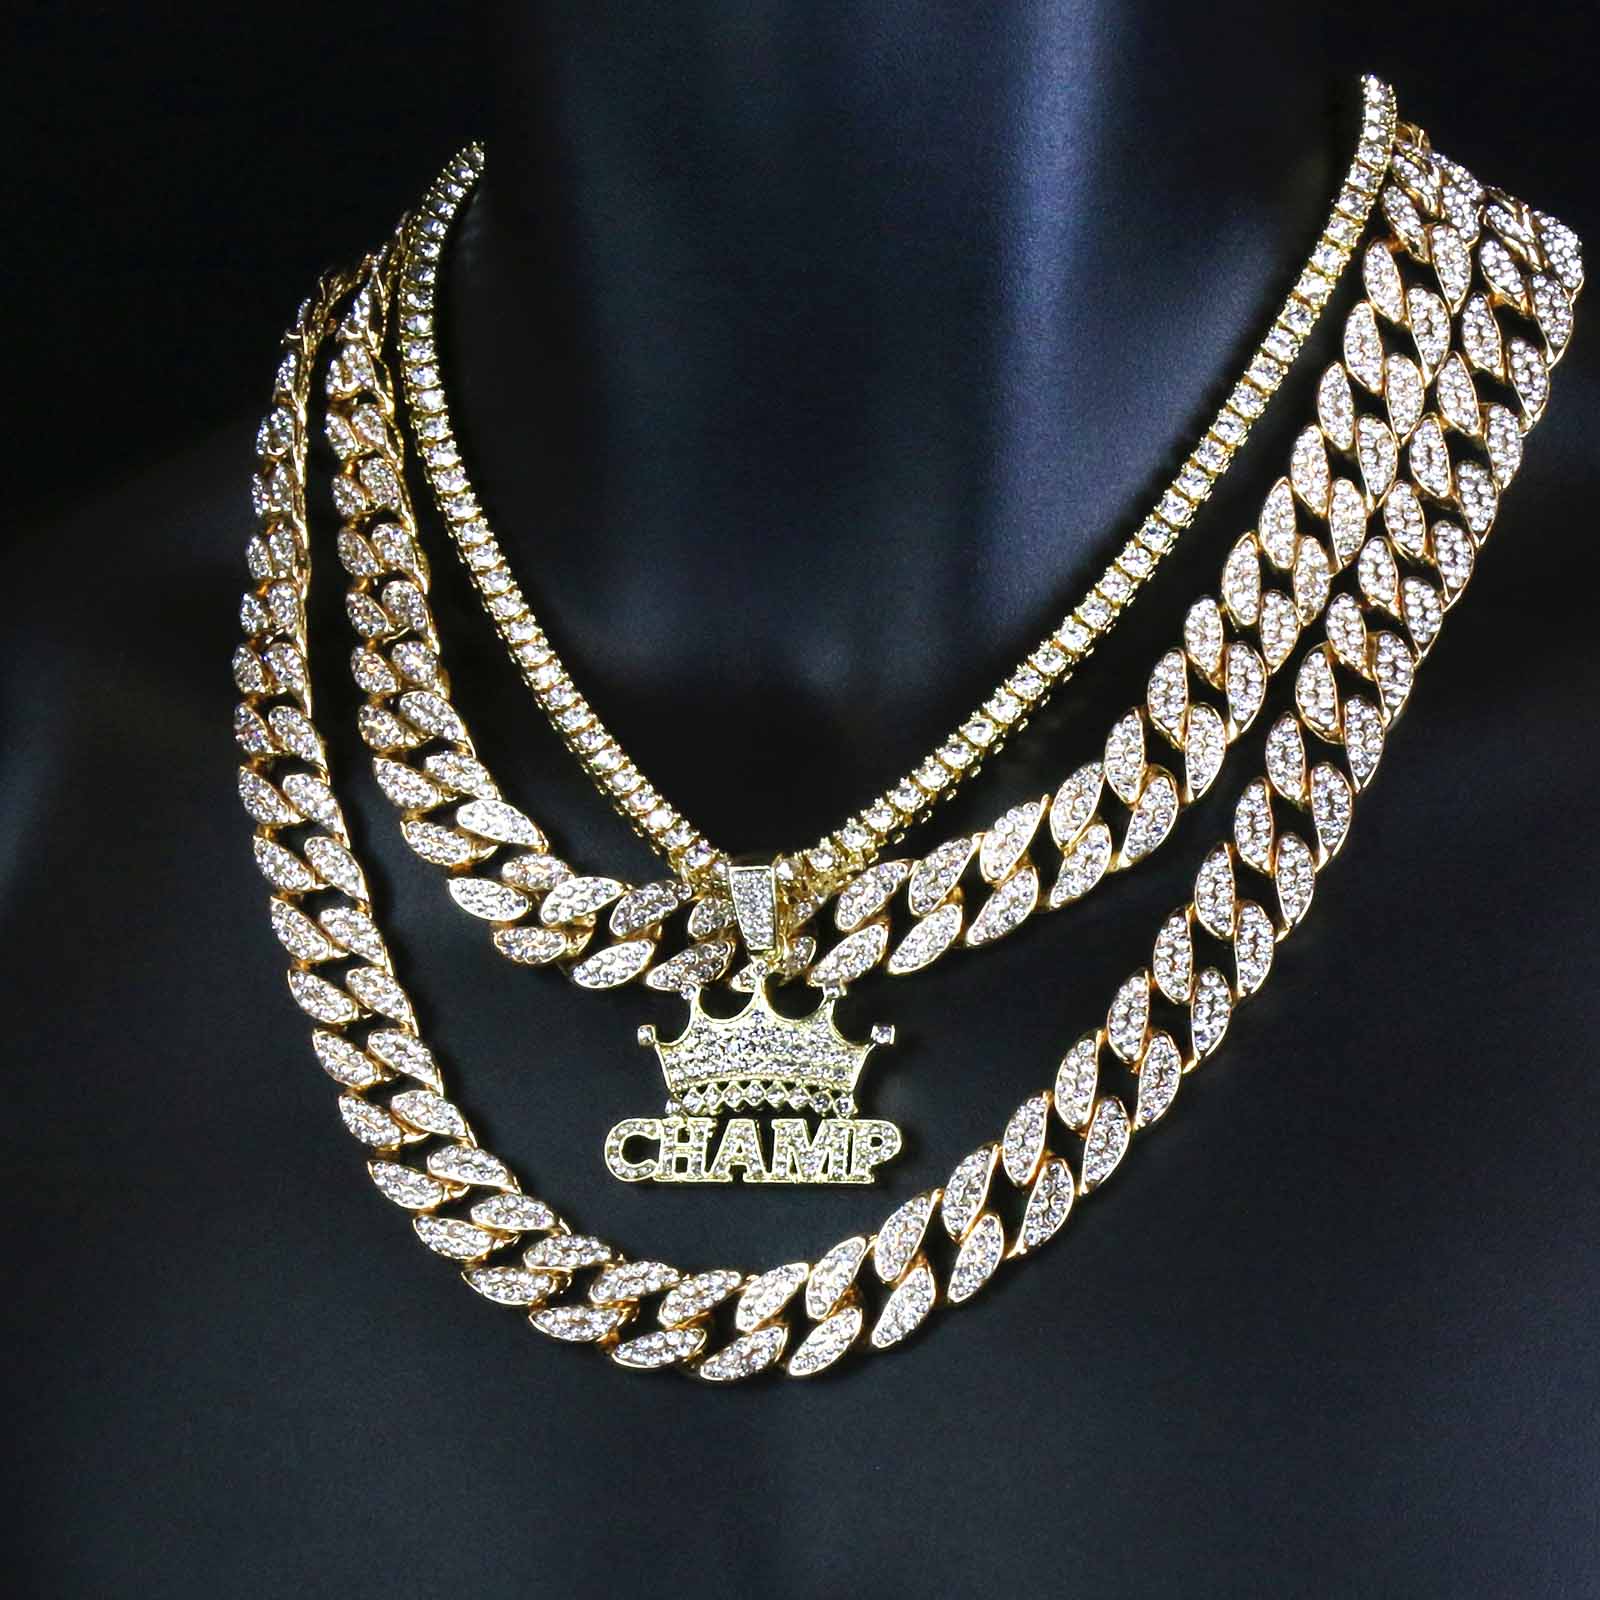 2 CUBAN CHAIN & GOLD CROWN CHAMP Necklace | BlingKingstar Jewelry ...